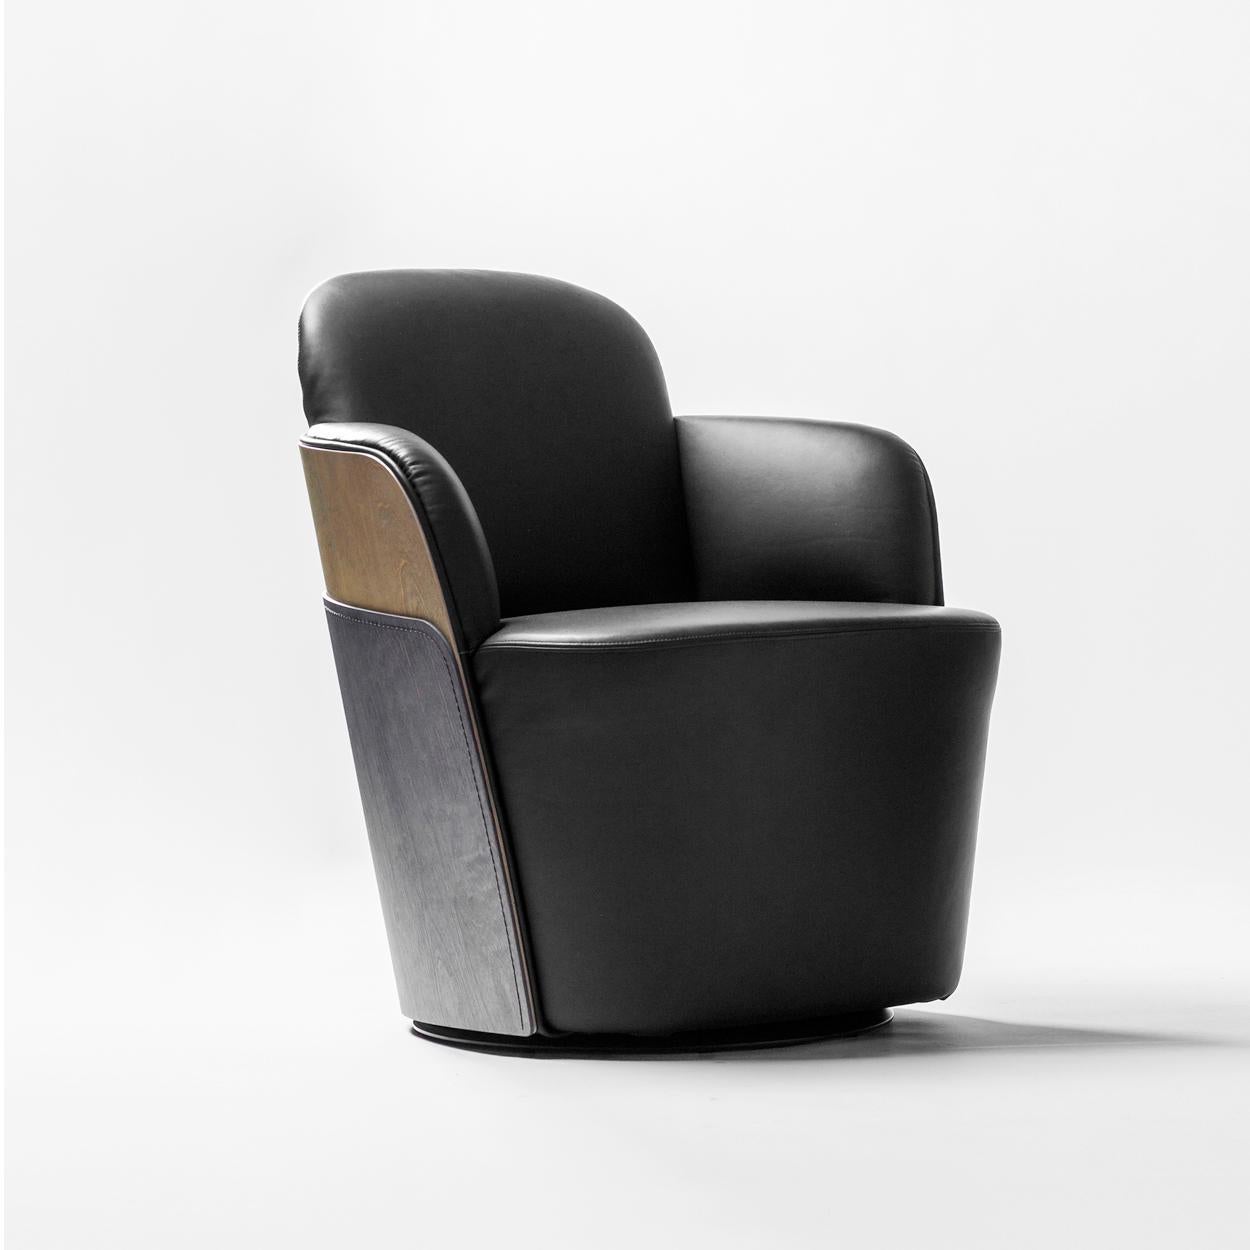 Armchair designed by Färg & Blanche manufactured by BD Barcelona

Solid wooden seat structure and upholstered. Exterior backrest made up of two birch plywood pieces sewn together and stained in a degraded color. Upholstered in leather. Optional